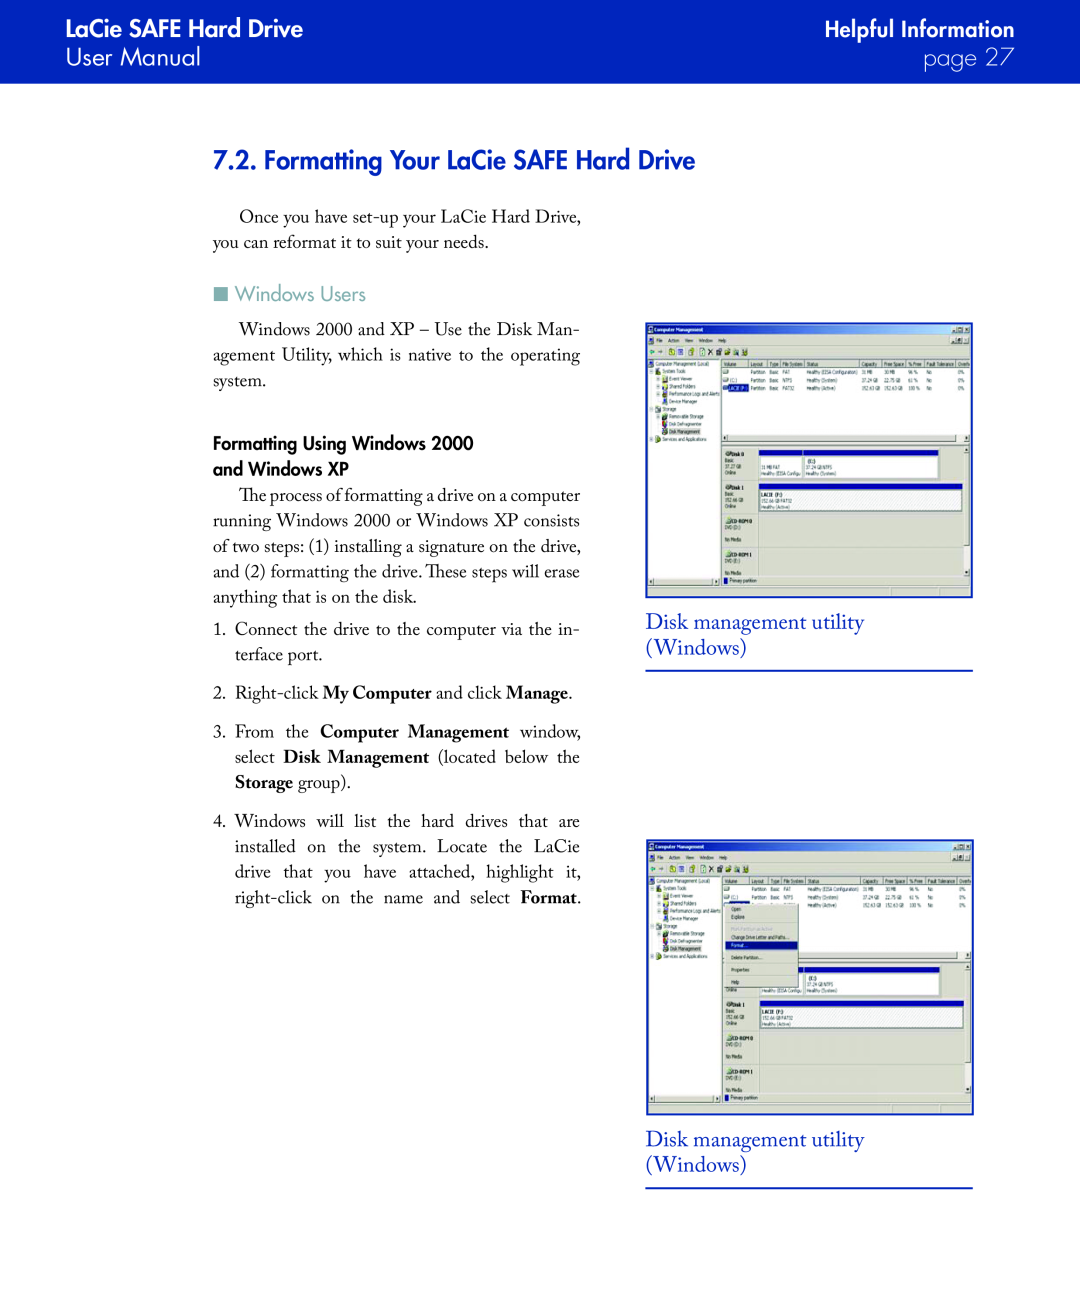 LaCie Formatting Your LaCie SAFE Hard Drive, Disk management utility Windows, User Manual, page, Helpful Information 